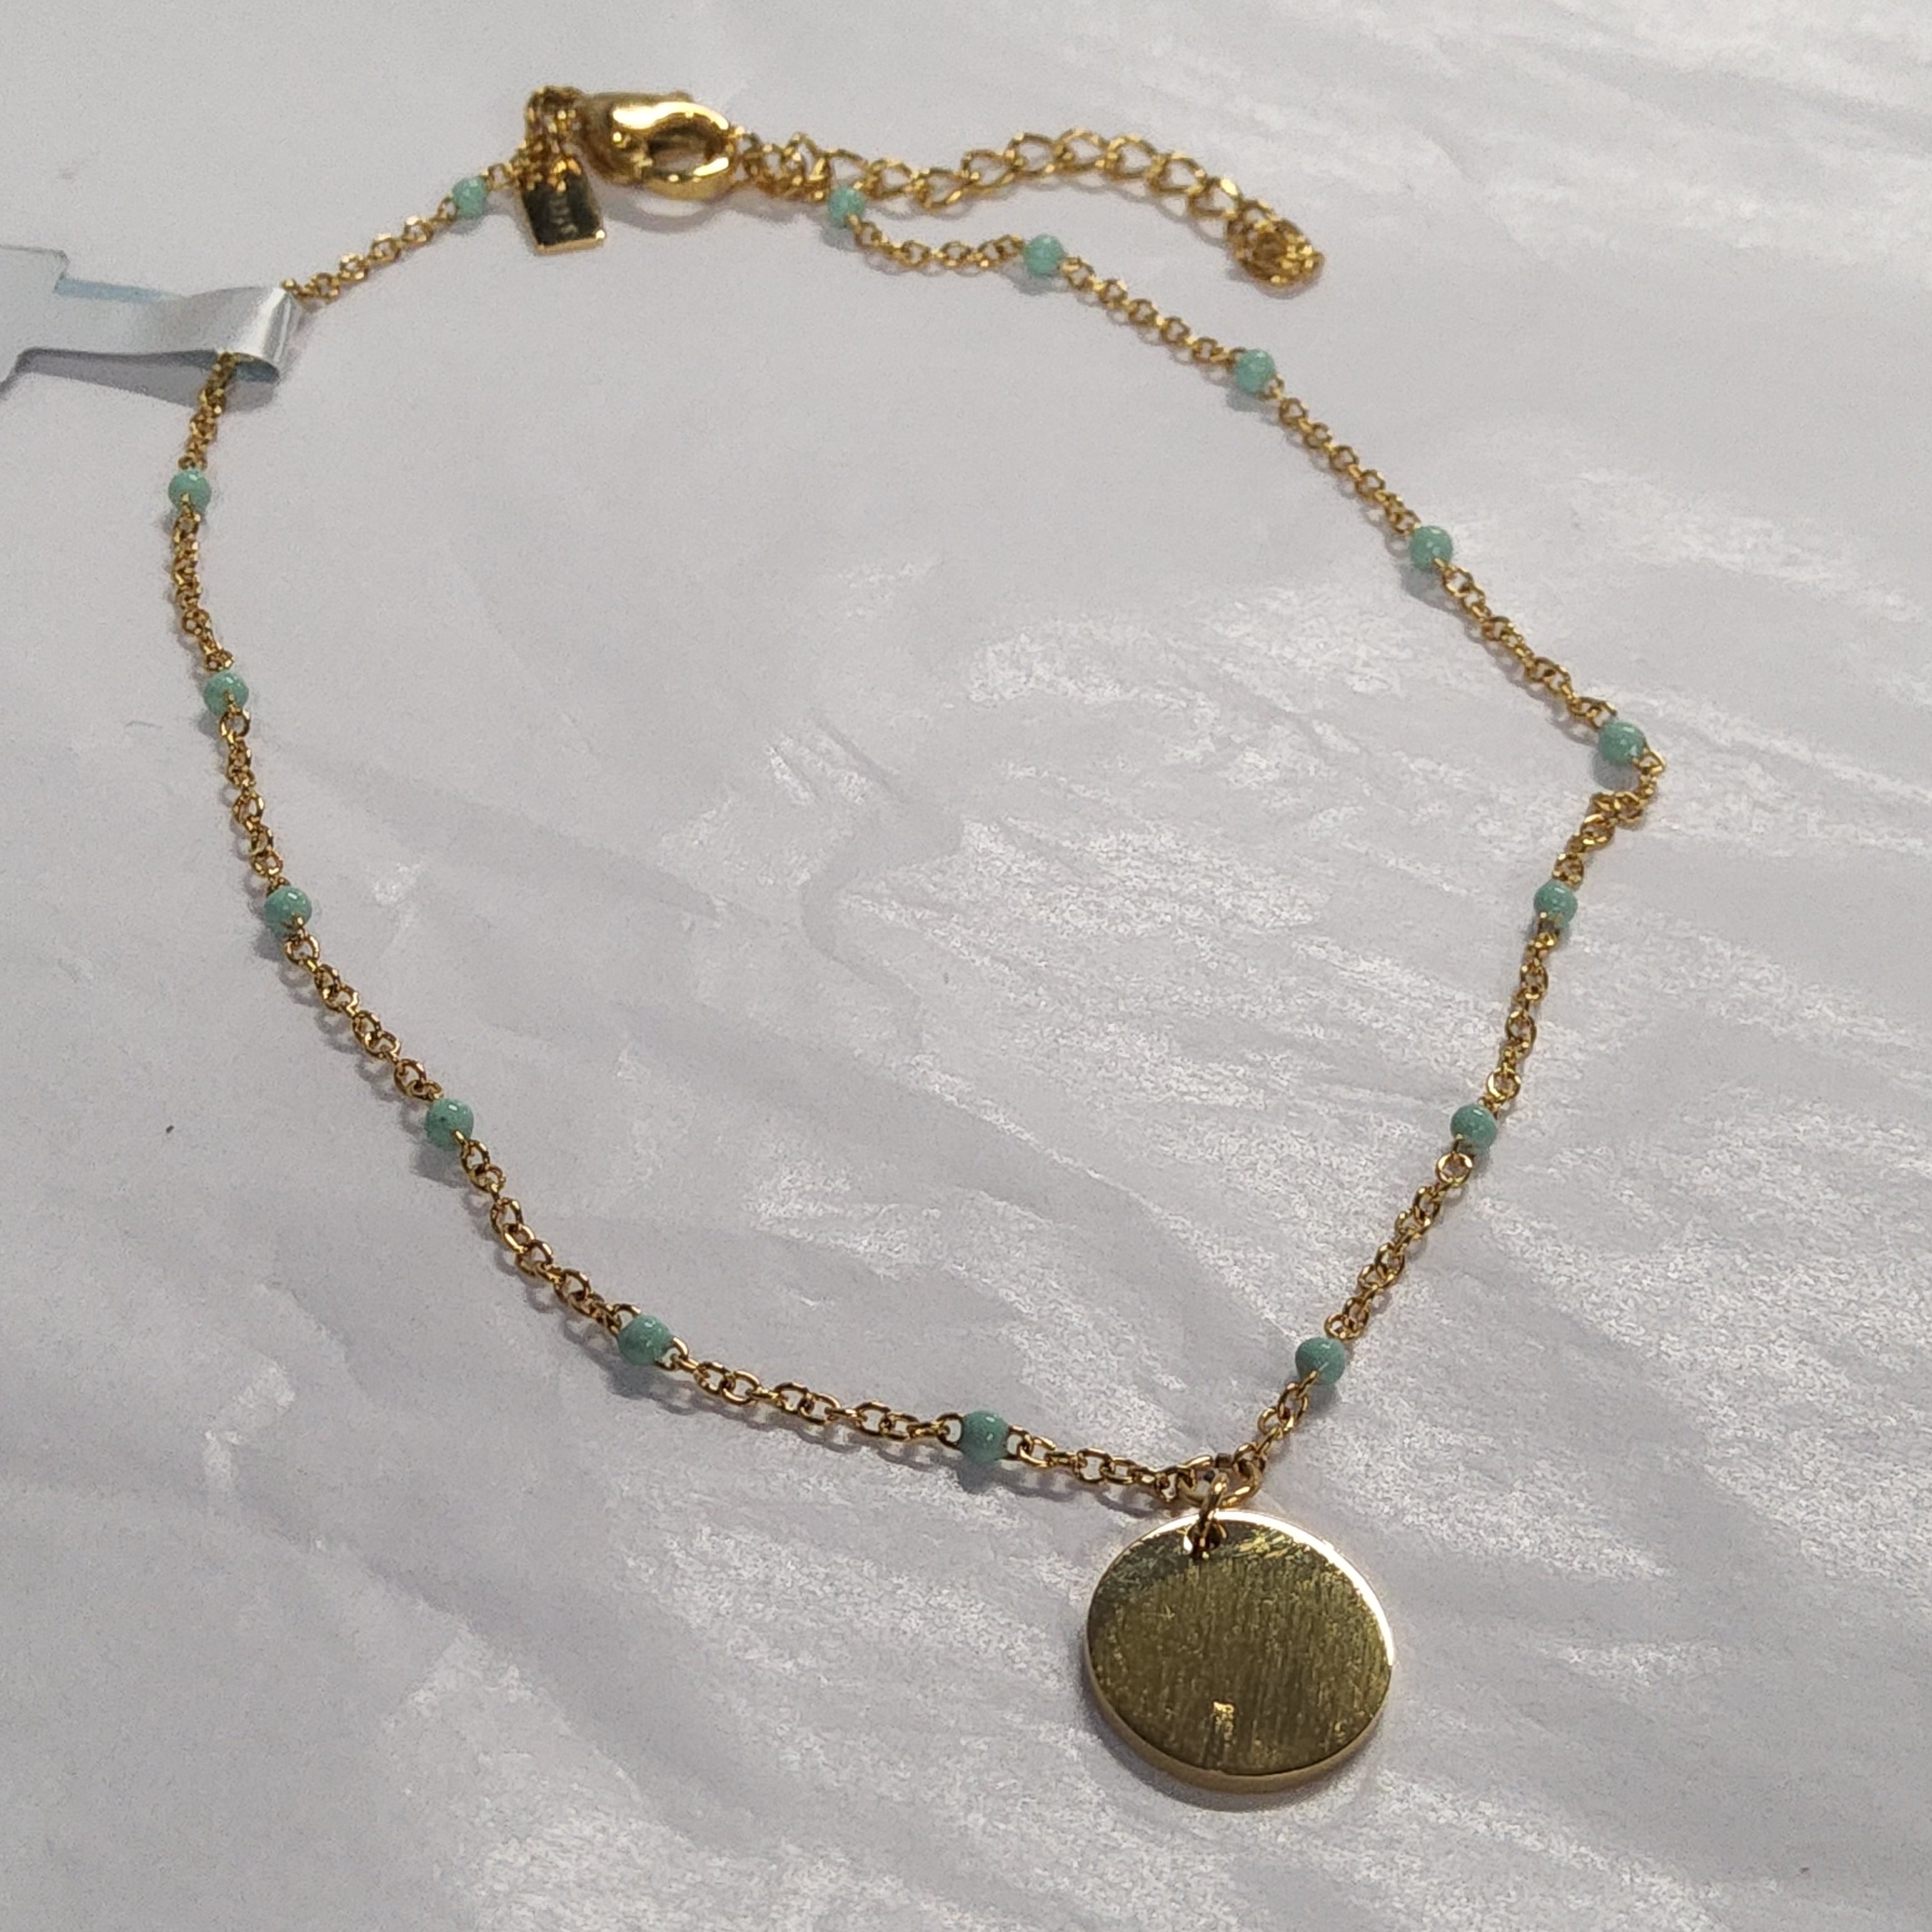 STEELX S/SAnklet - Gold-plated with Turquoise Beads